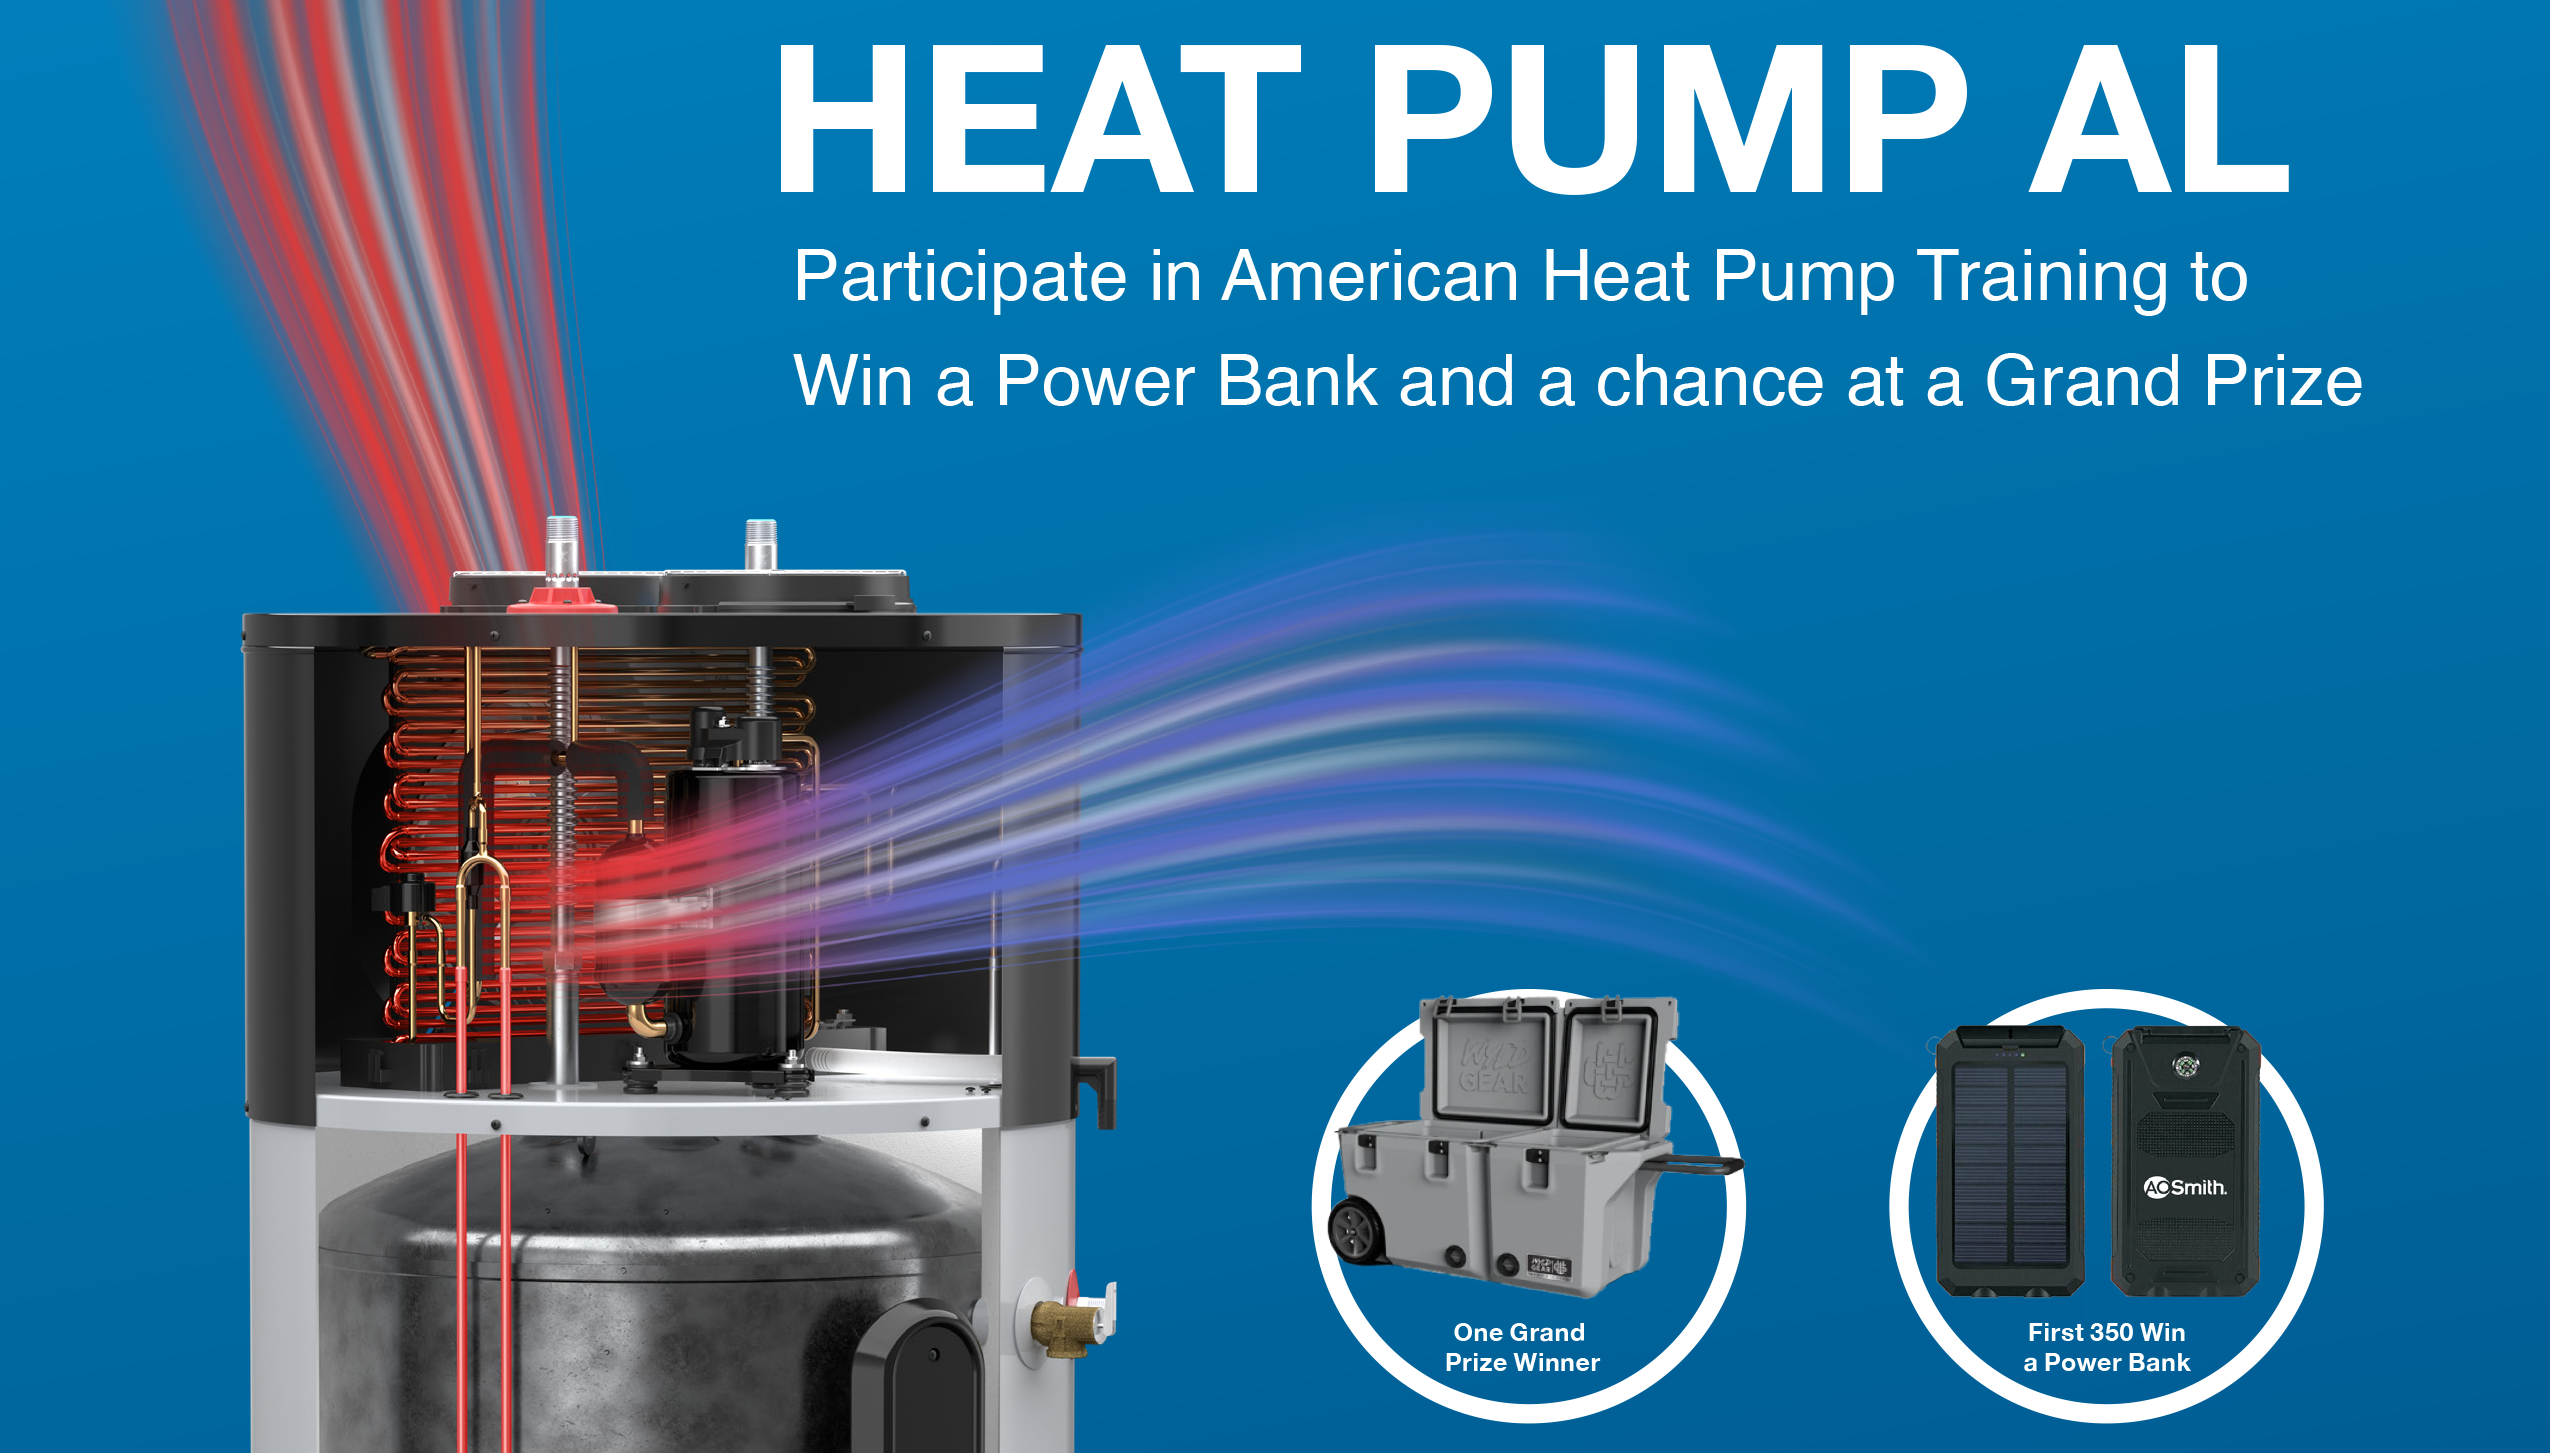 Heat Pump Learn and Earn Contest Details